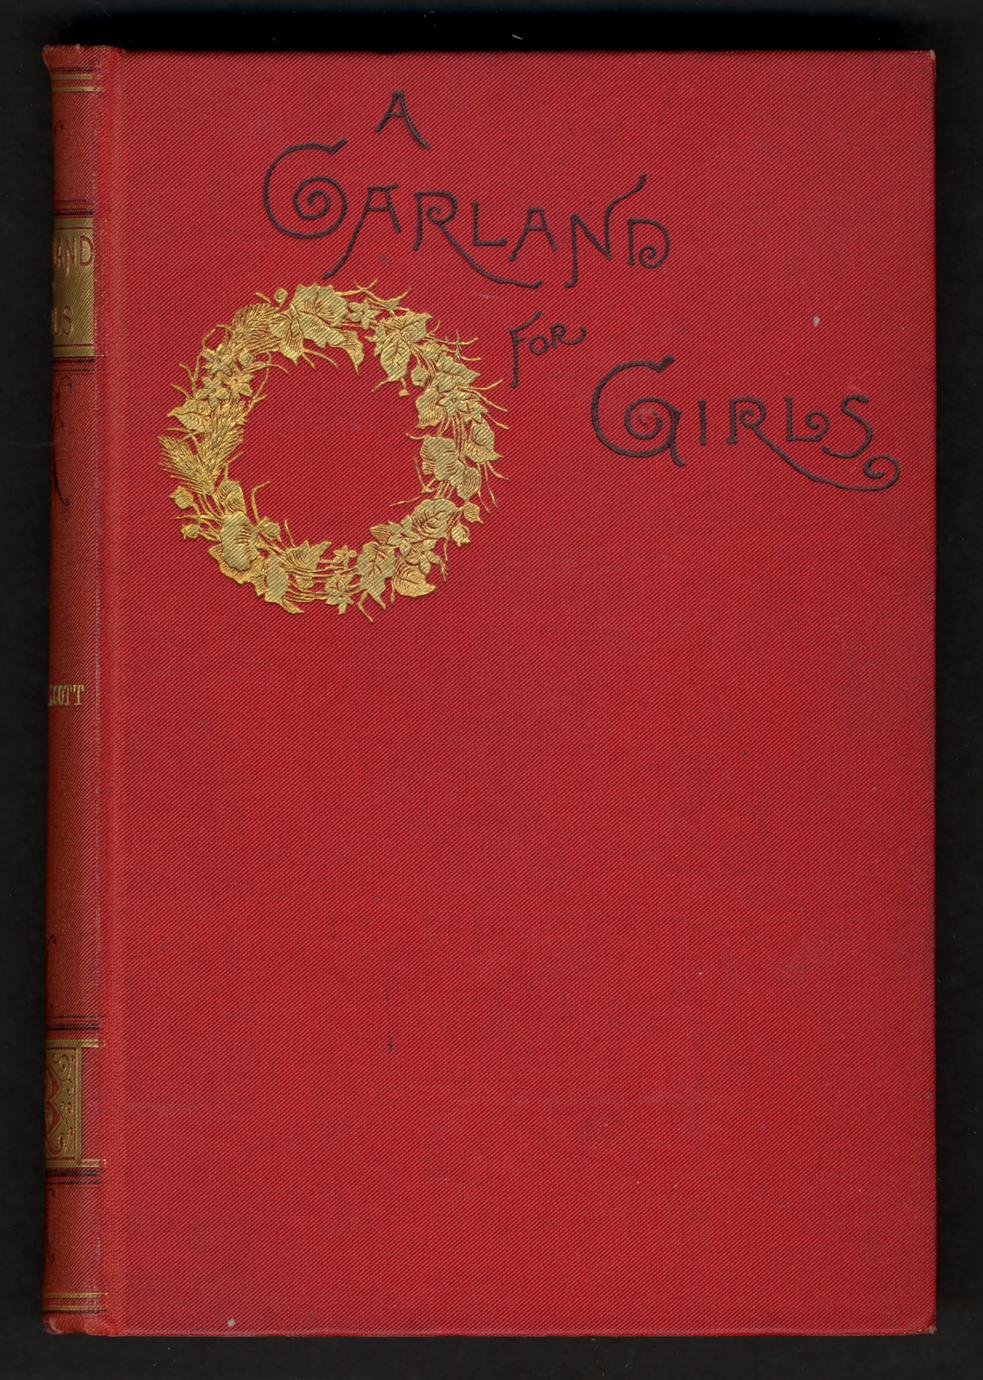 A garland for girls (1 of 3)